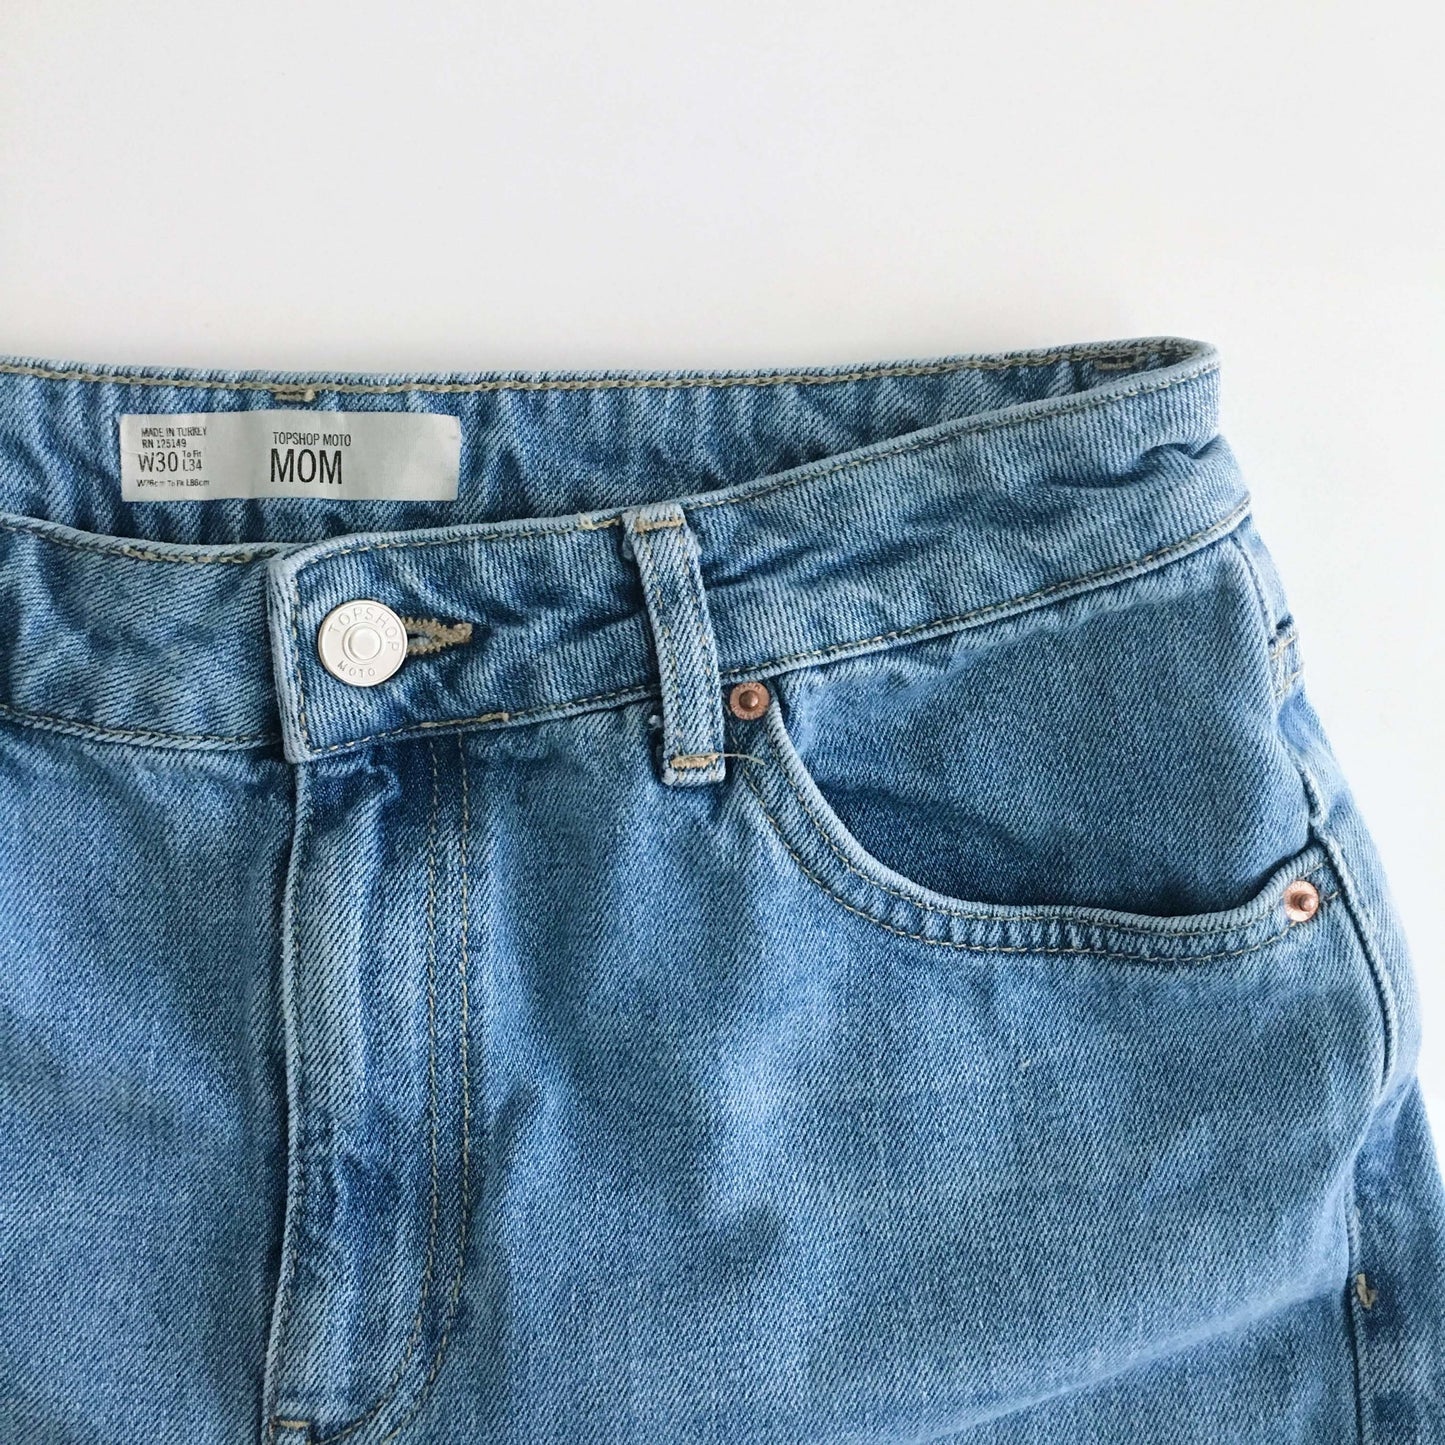 Topshop Moto Mom Jeans - size 30